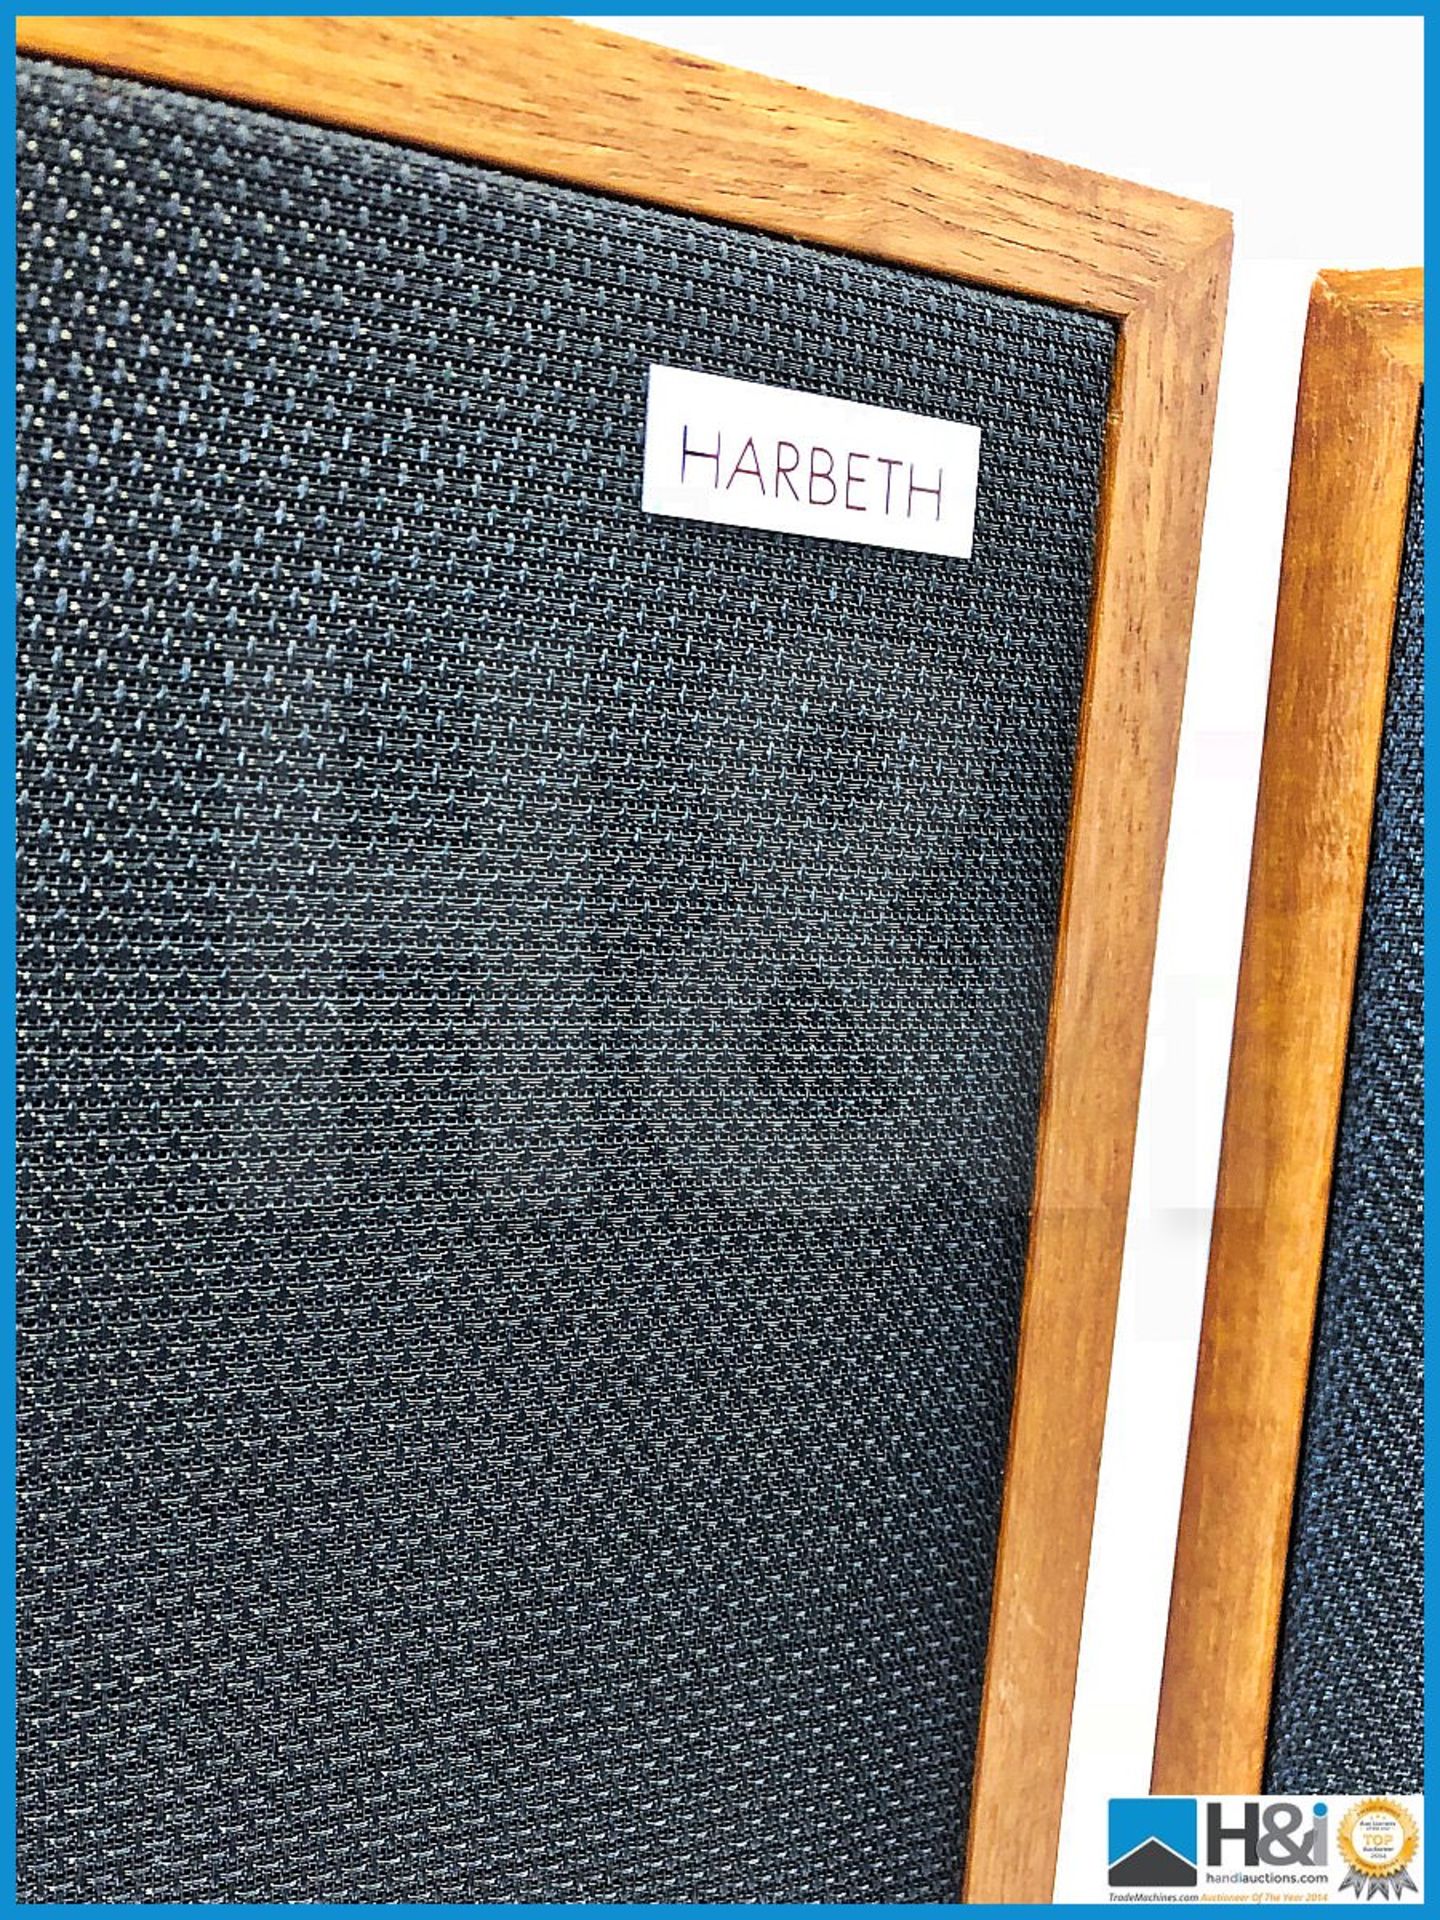 Pair Of Harbeth Accoustics ML Monitor speakers in fine condition - Image 2 of 7